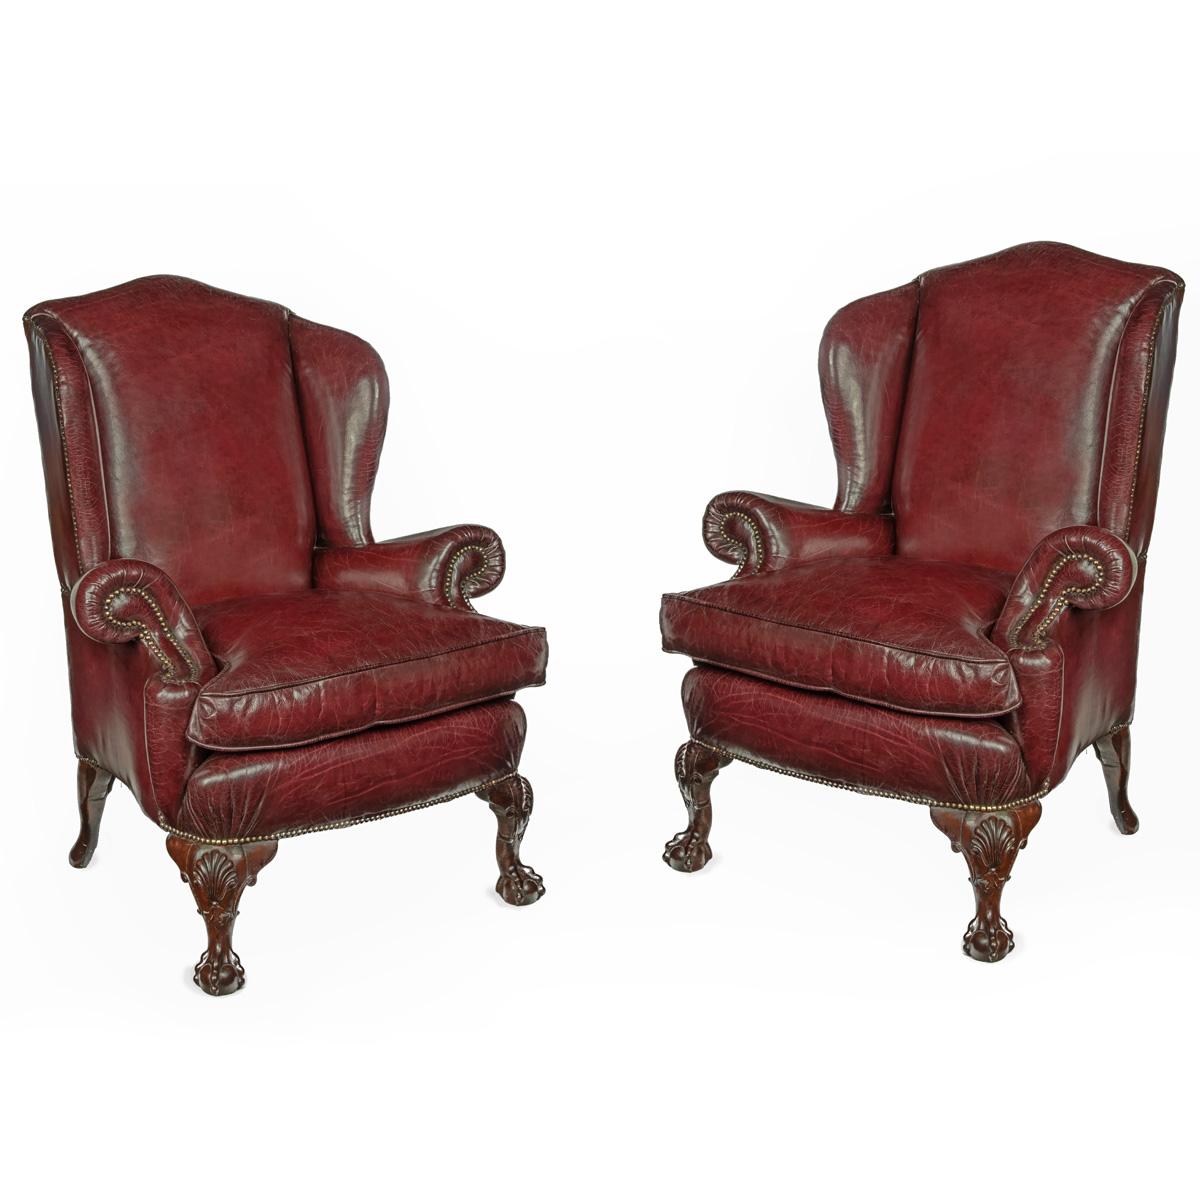 A pair of generous mahogany wing armchairs with shell carved knees, each with close buttoned scroll arms and generous seats, the legs carved with shells on the knees and ball and claw feet, reupholstered in distressed burgundy leather.  English,